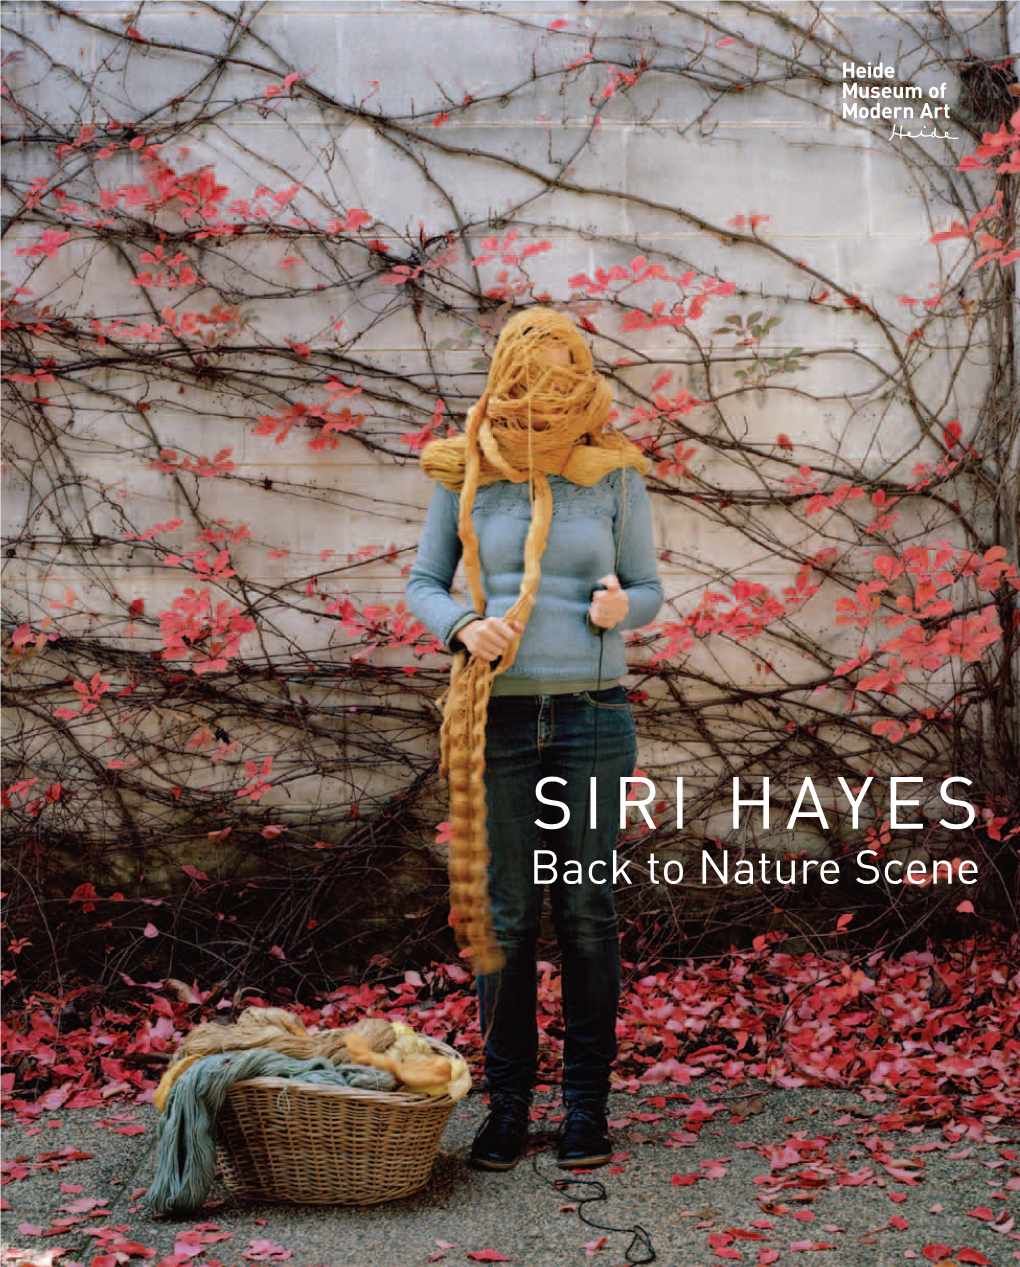 Siri Hayes Back to Nature Exhibition Brochure.Pdf